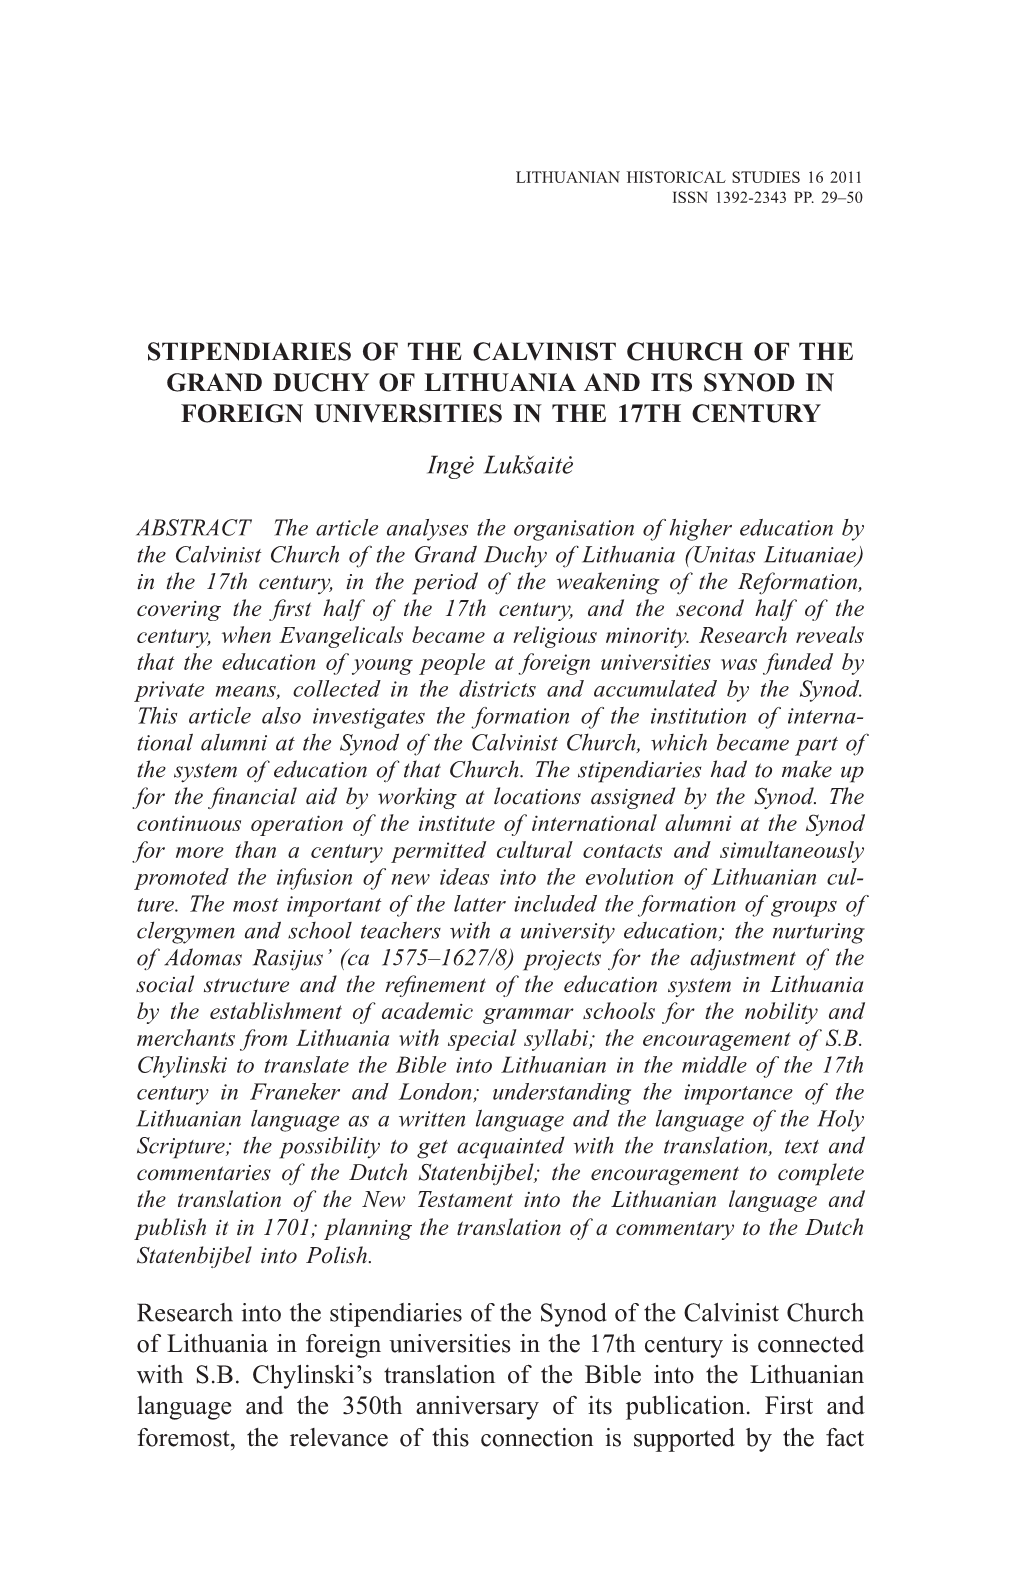 STIPENDIARIES of the CALVINIST CHURCH of the GRAND DUCHY of LITHUANIA and ITS SYNOD in FOREIGN UNIVERSITIES in the 17TH CENTURY Ingė Lukšaitė